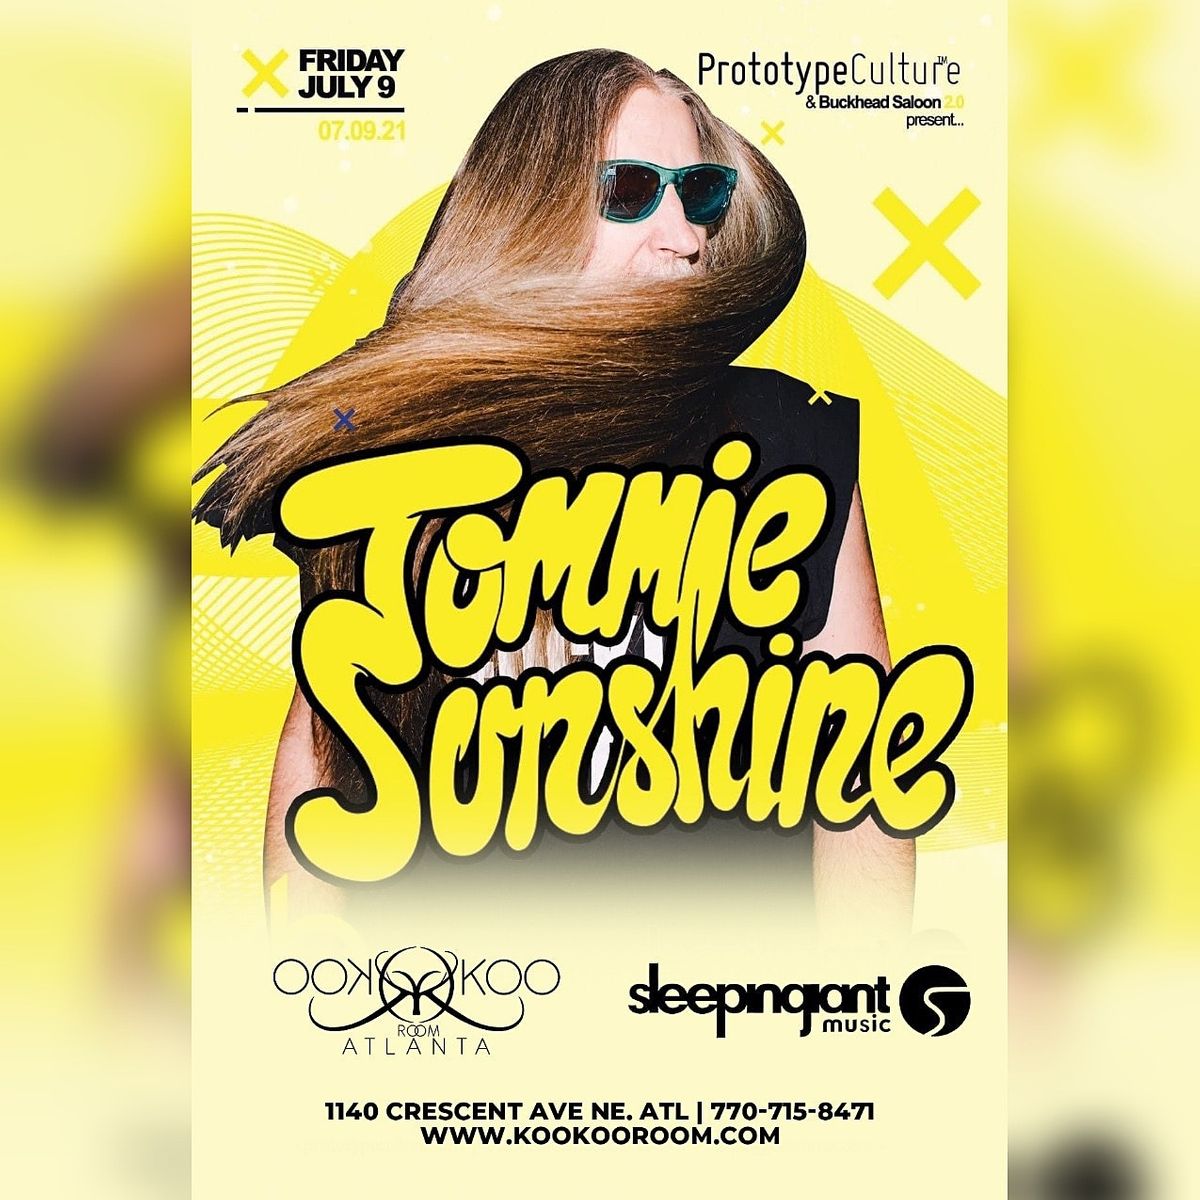 PrototypeCulture Presents Tommie Sunshine